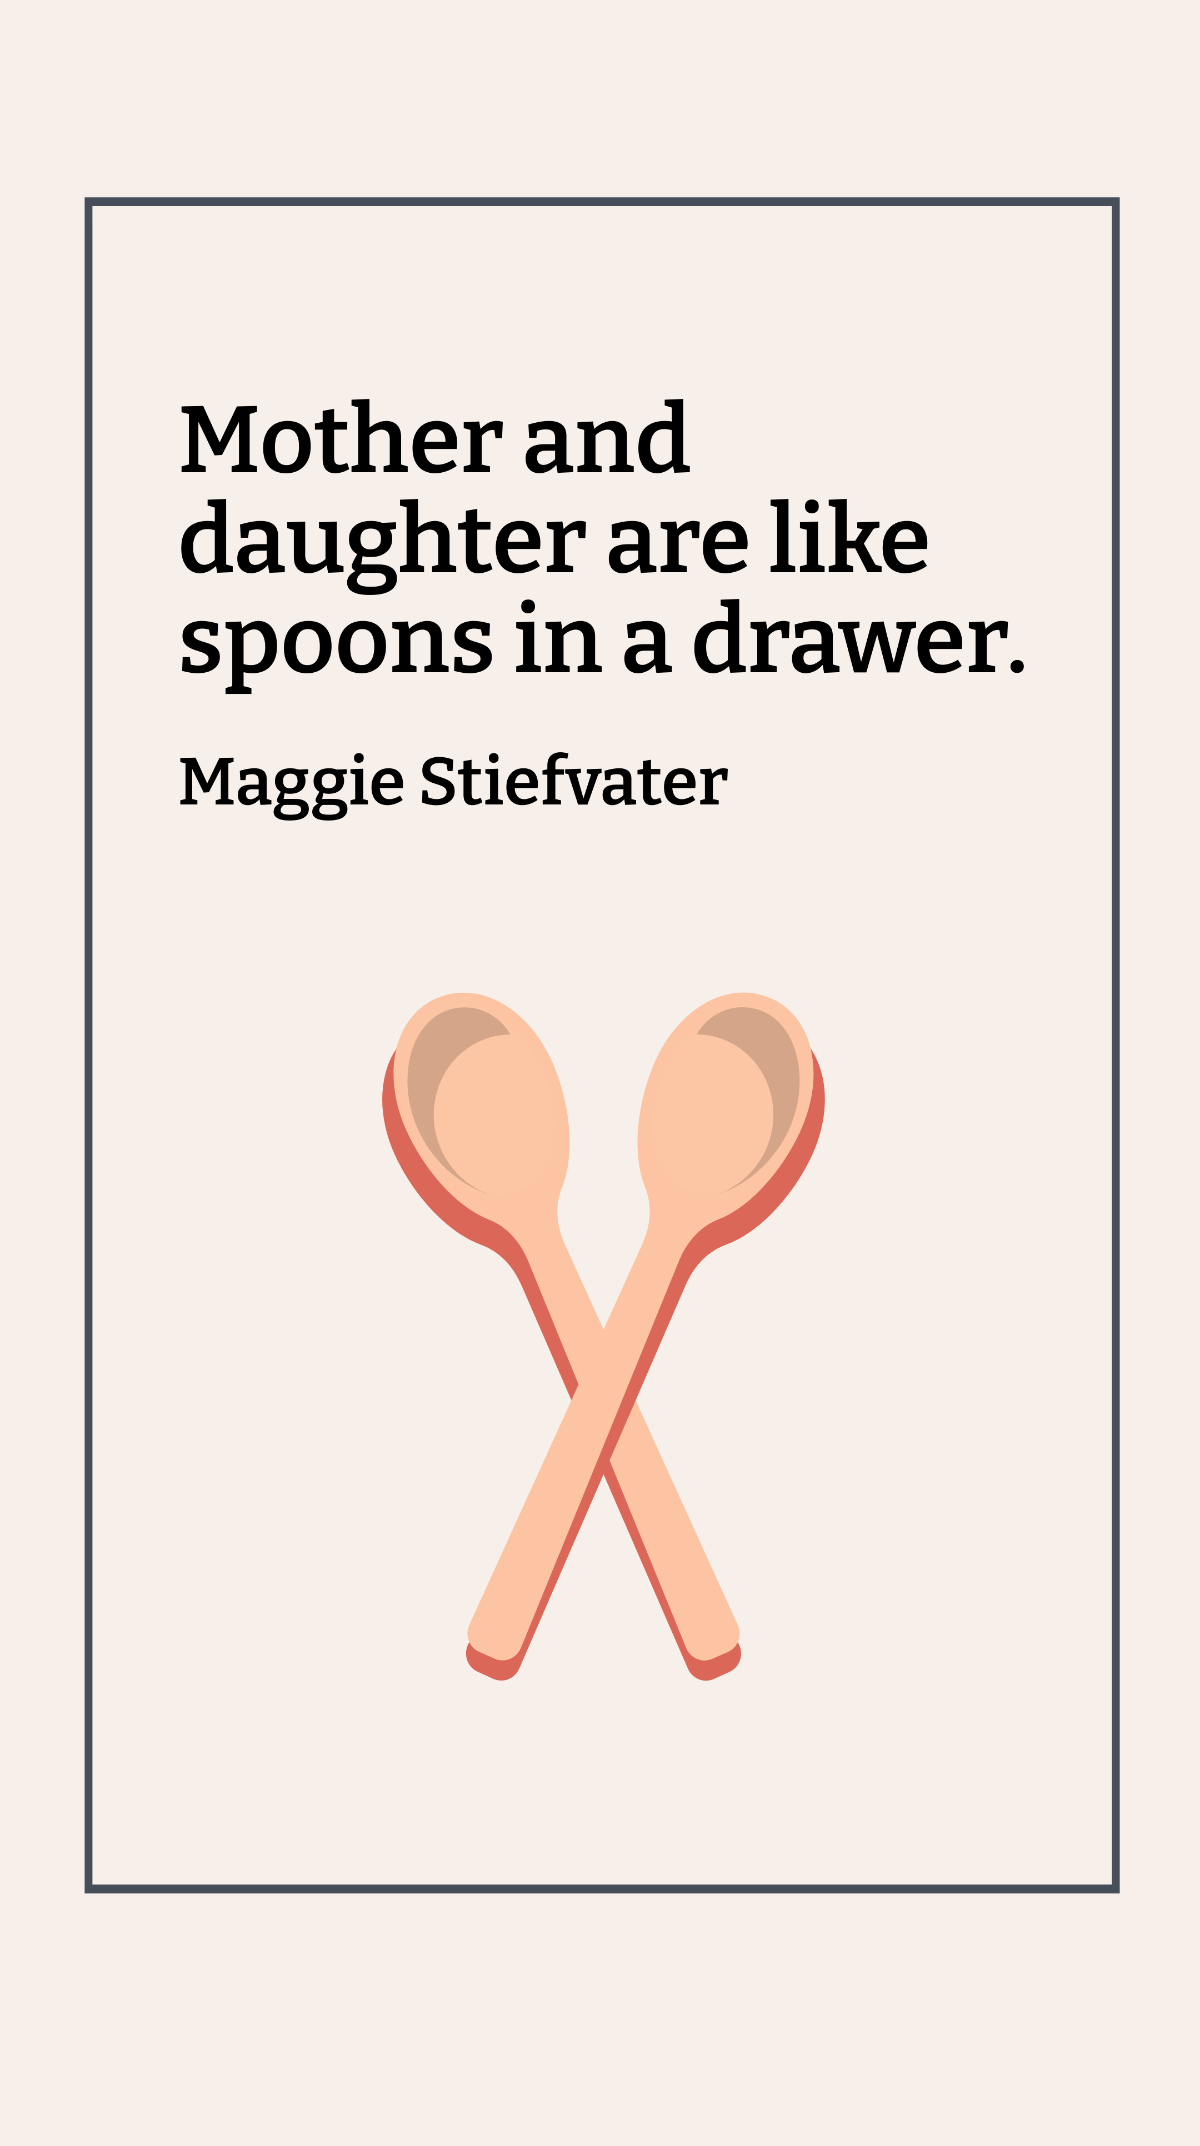 Maggie Stiefvater - Mother and daughter are like spoons in a drawer. Template